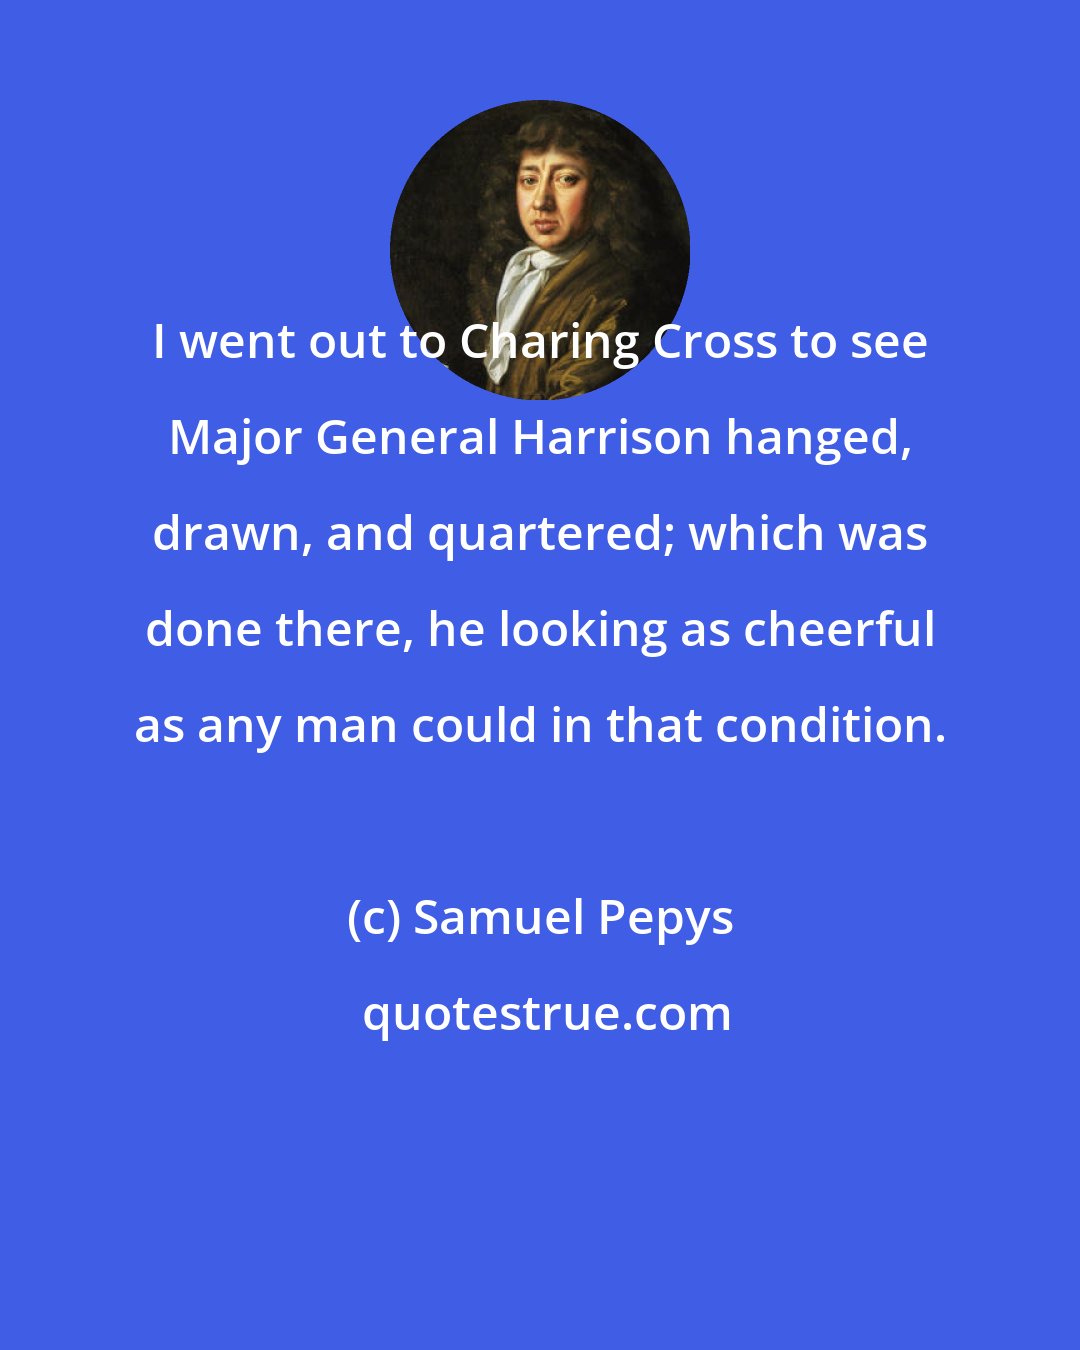 Samuel Pepys: I went out to Charing Cross to see Major General Harrison hanged, drawn, and quartered; which was done there, he looking as cheerful as any man could in that condition.